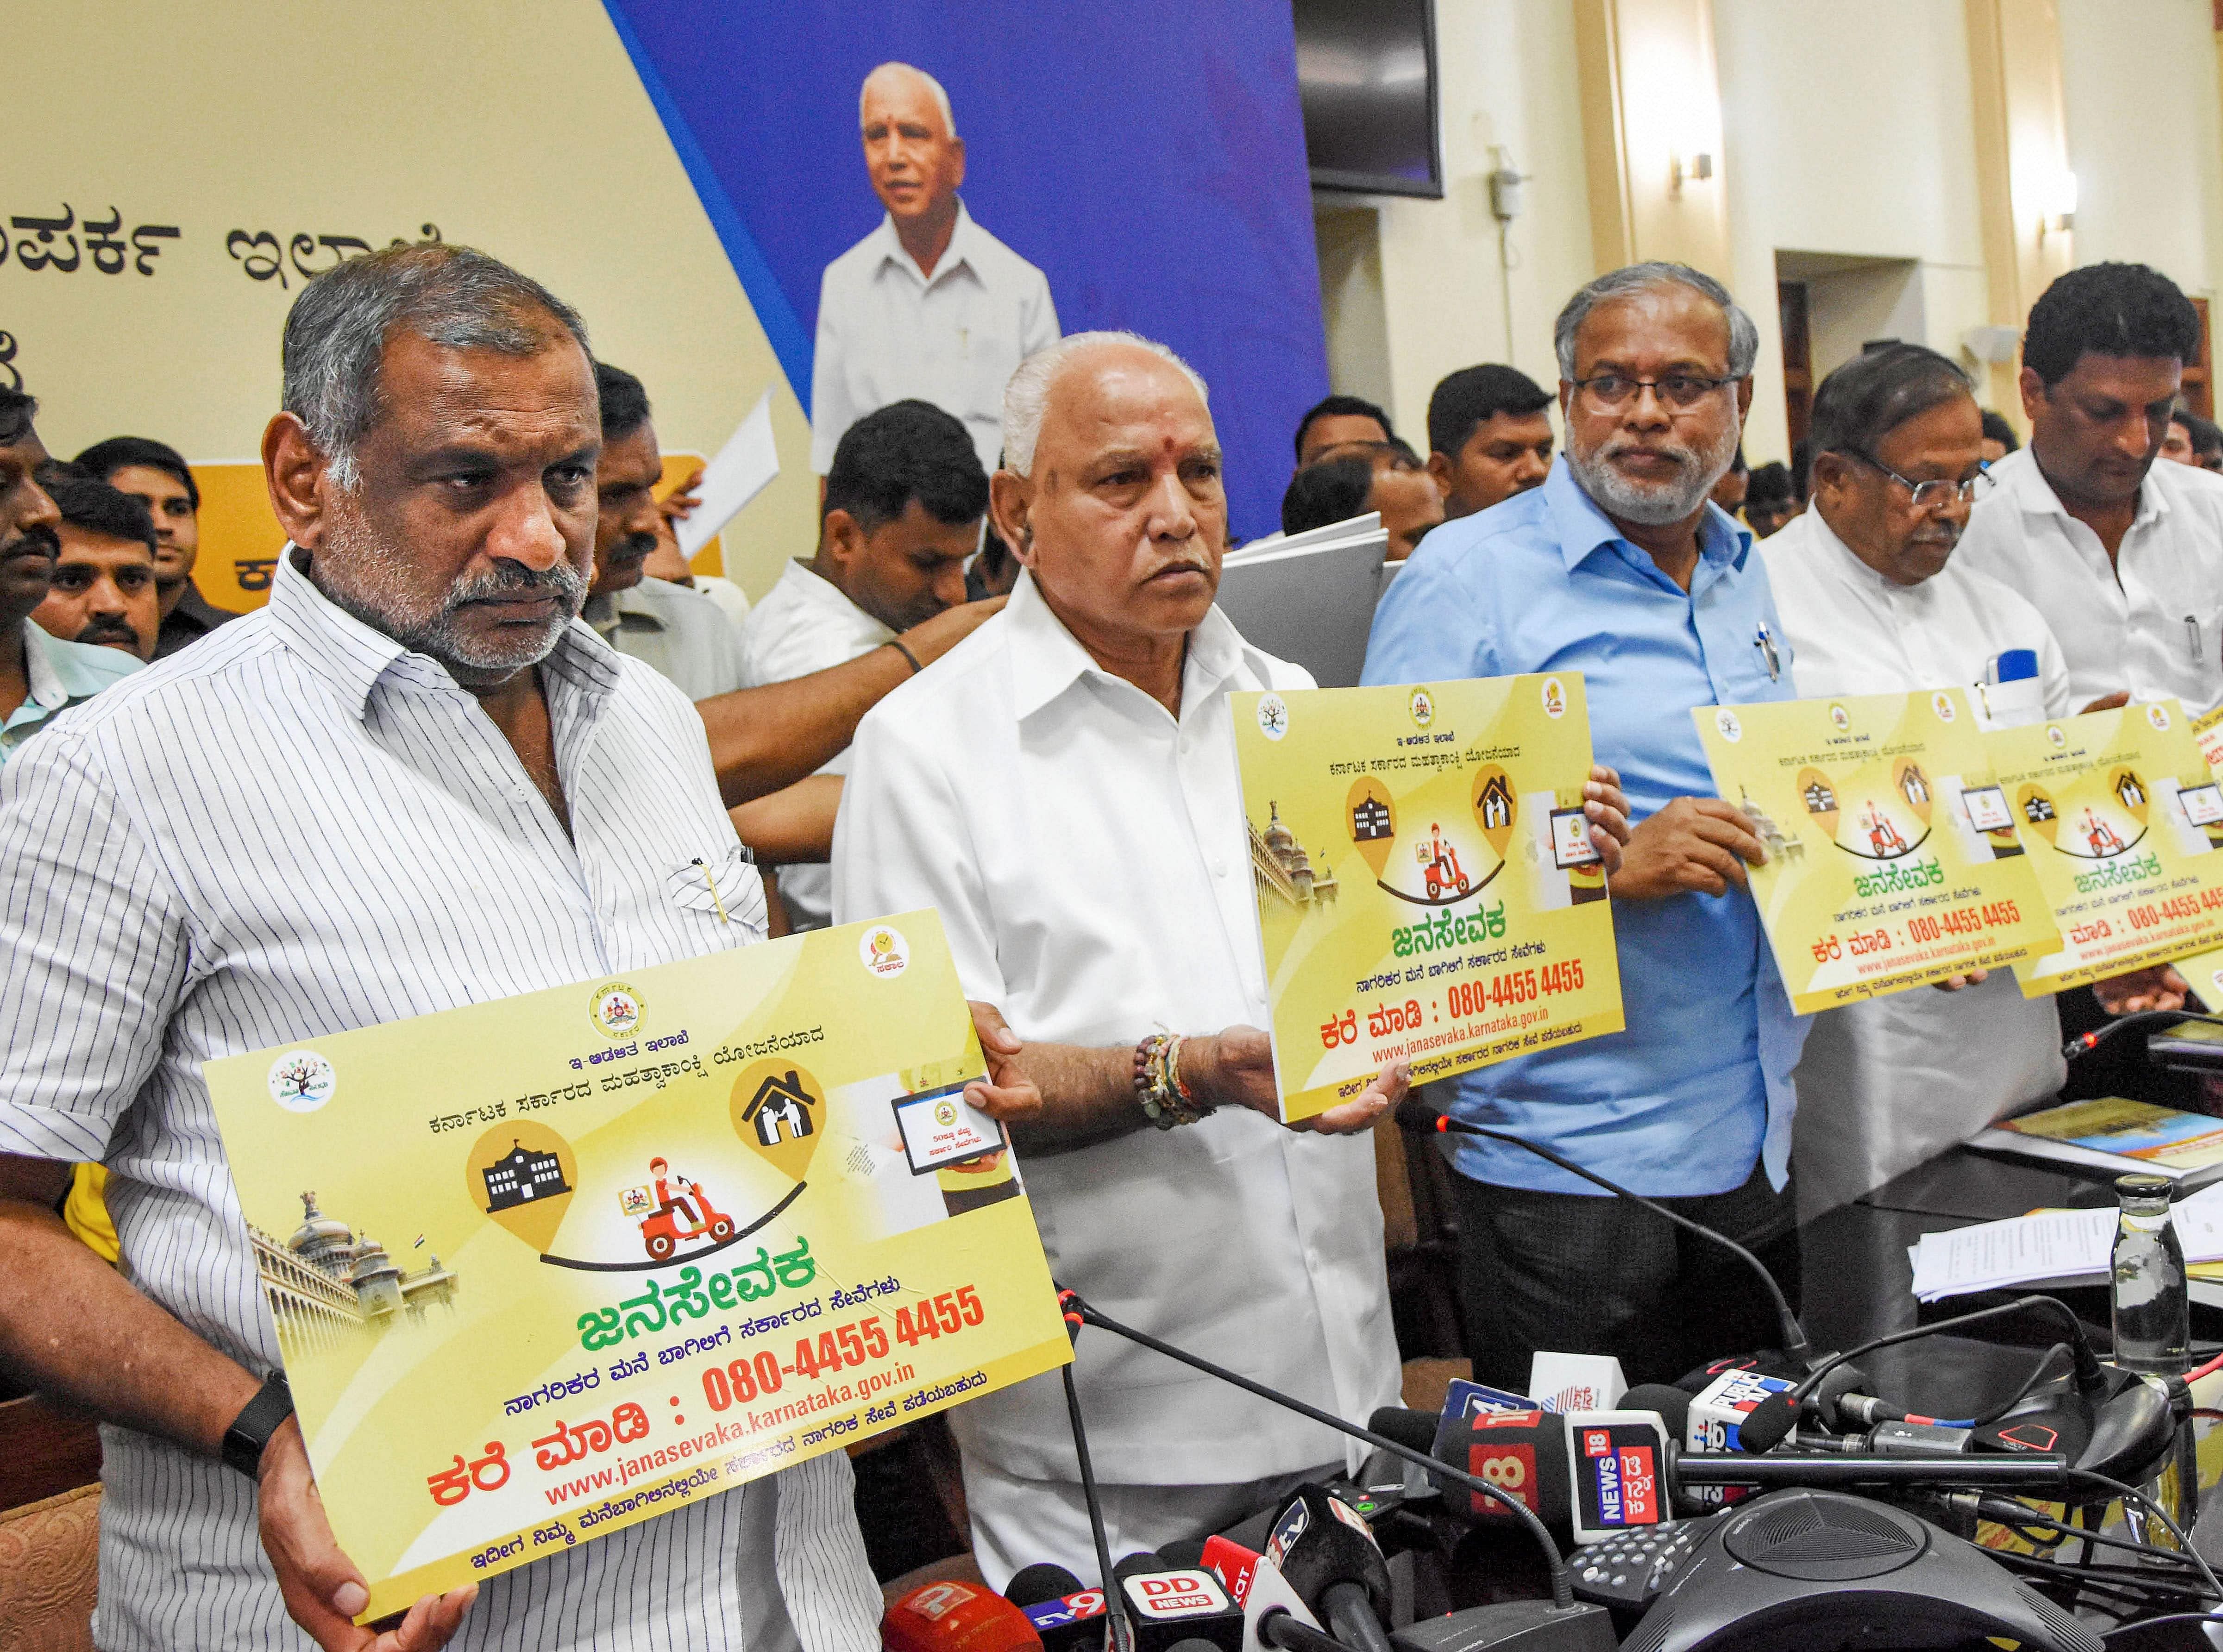 The government also launched ‘Mahiti Kanaja’, a web portal, by logging on to which a person can know the progress of as many as 80 schemes. (Credit: PTI Photo)